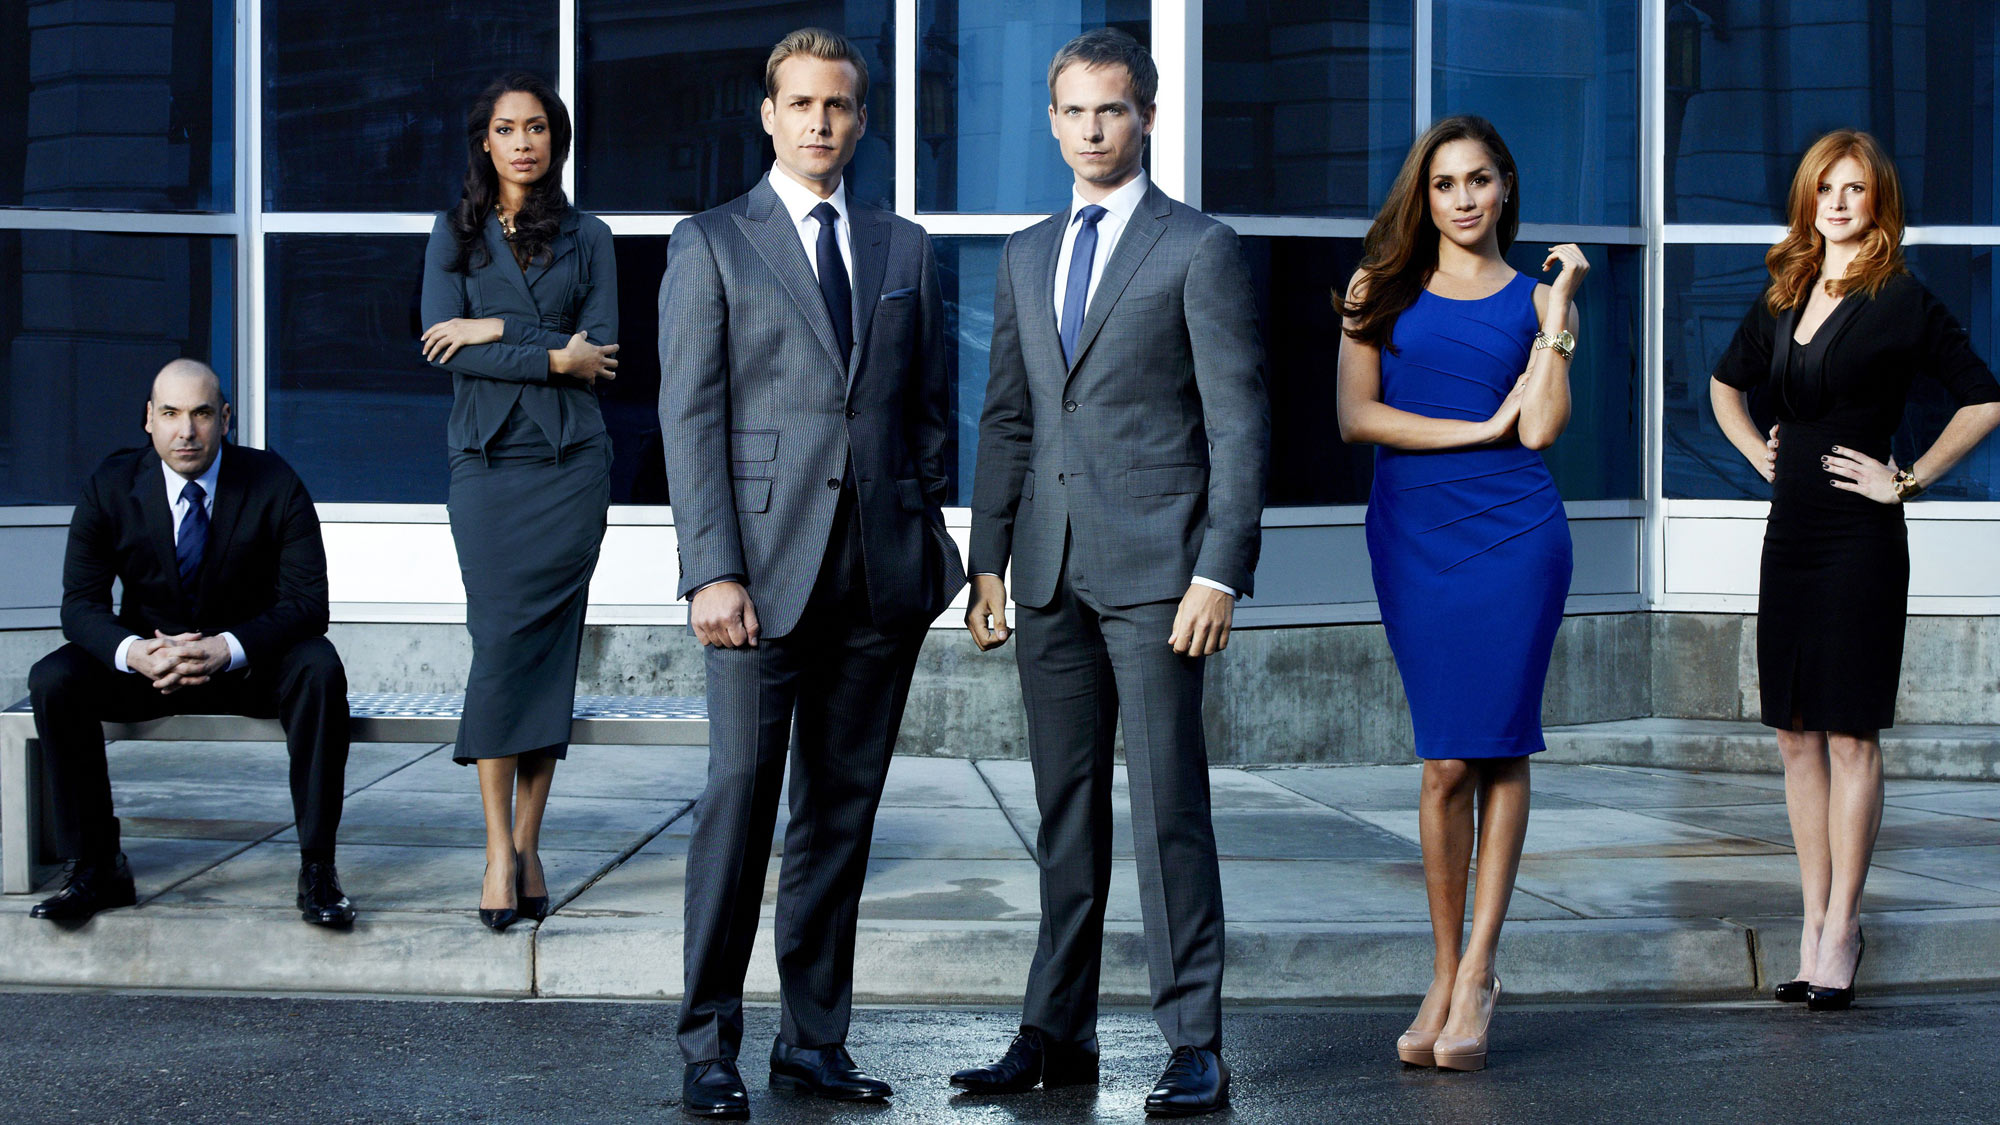 Best Peacock shows: Suits